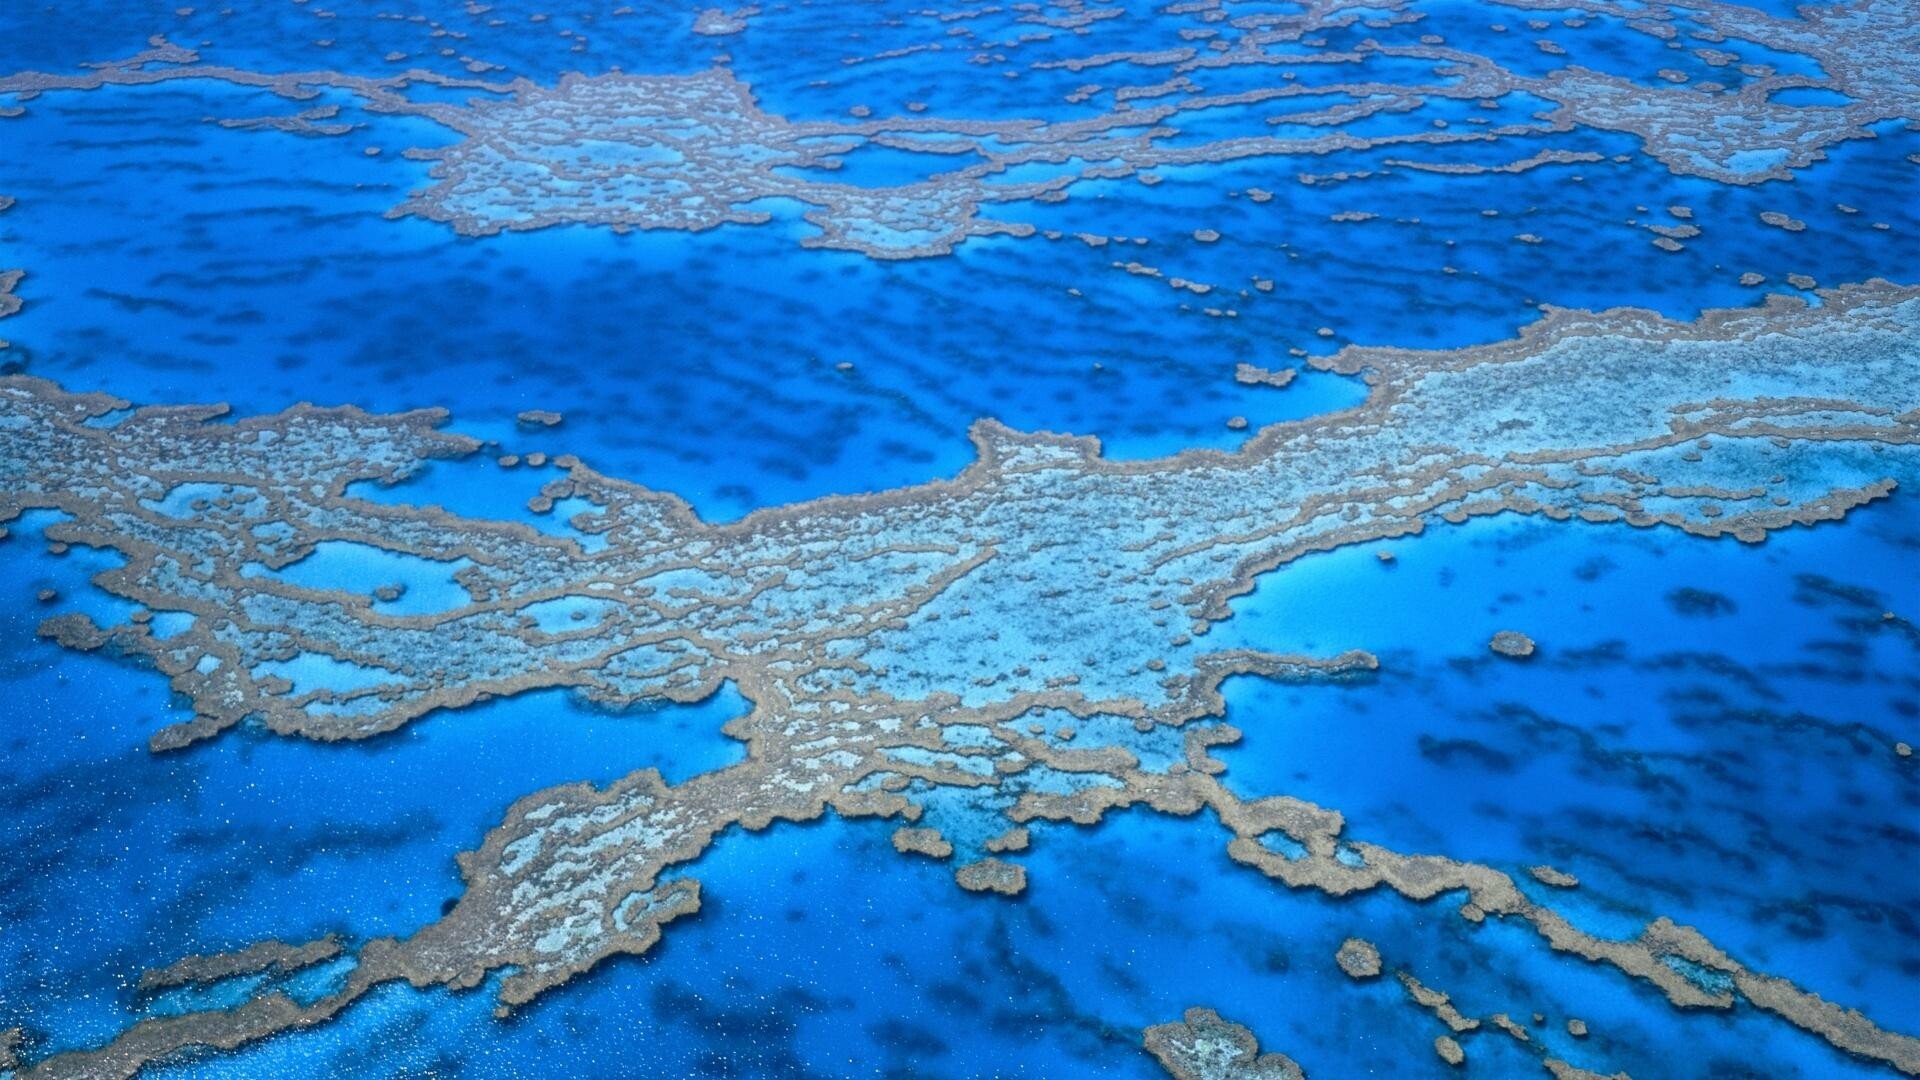 Great Barrier Reef: The world's largest coral reef system, composed of over 2,900 individual reefs and 900 islands. 1920x1080 Full HD Background.